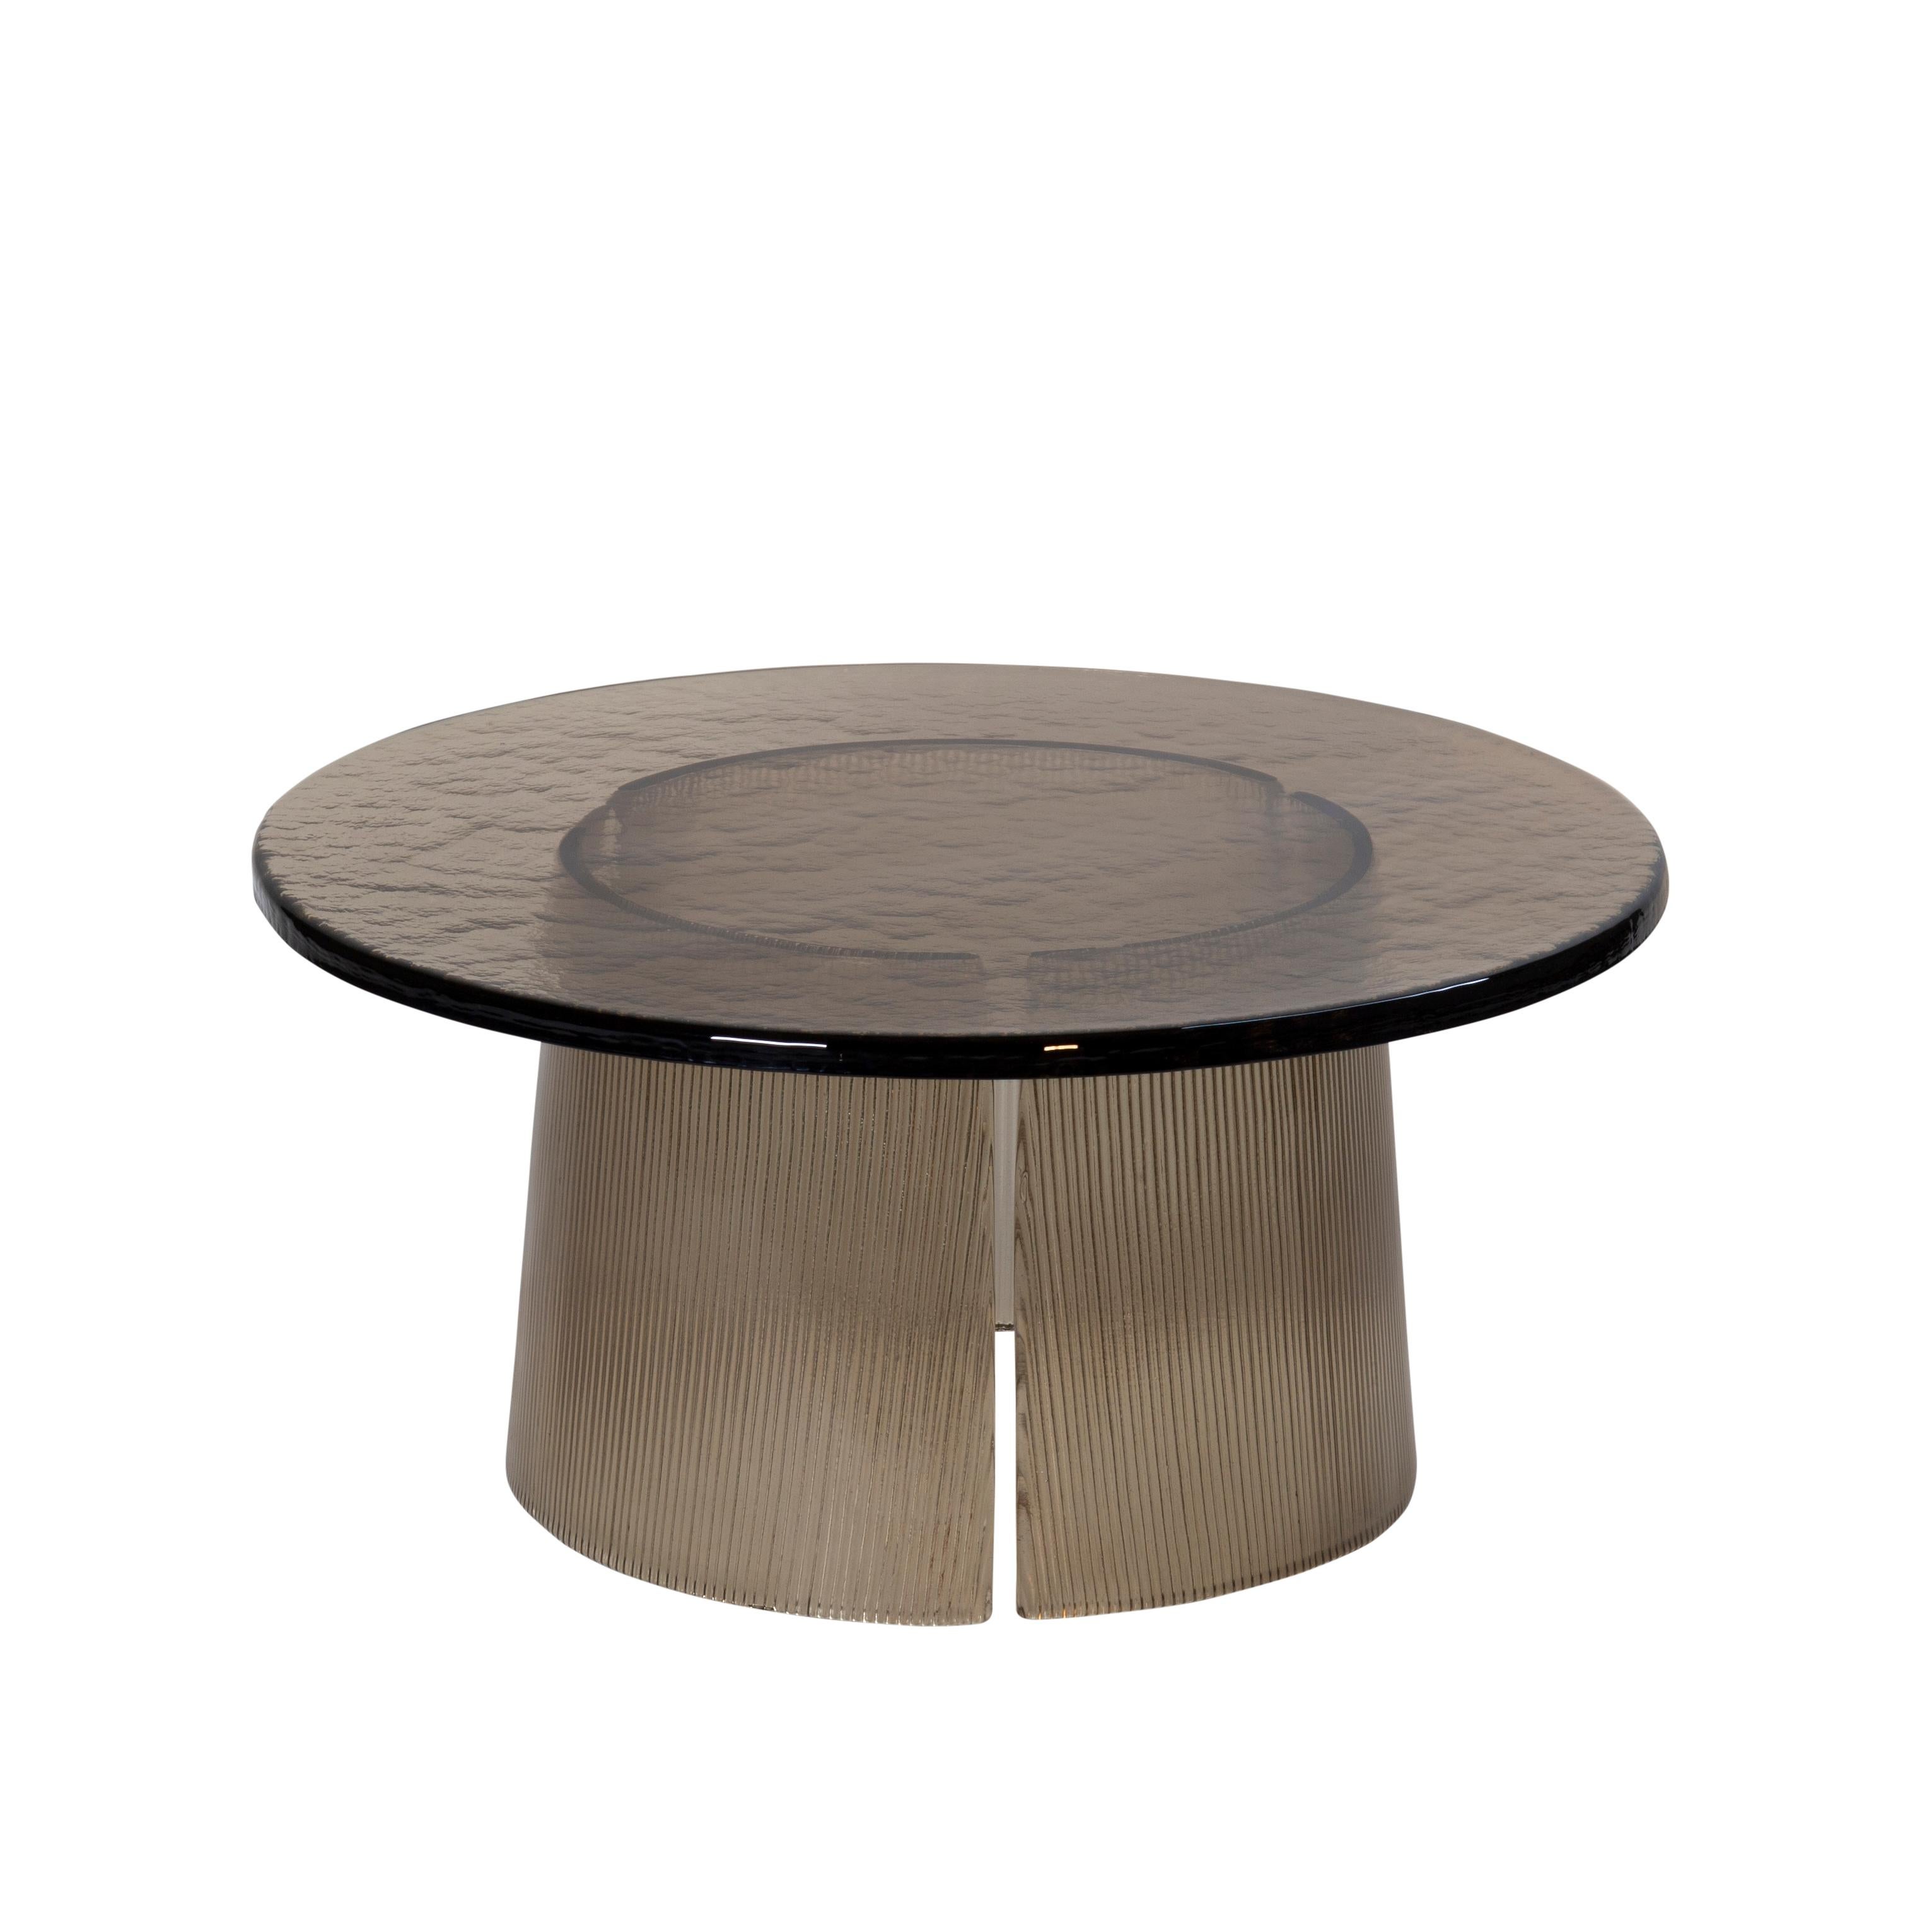 Bent side table big smoky grey by Pulpo
Dimensions: D 75 x H 35 cm
Materials: casted glass

Also available in different finishes and dimensions.

The bubbled surface of the cast glass table top dances against with the smooth lines of the